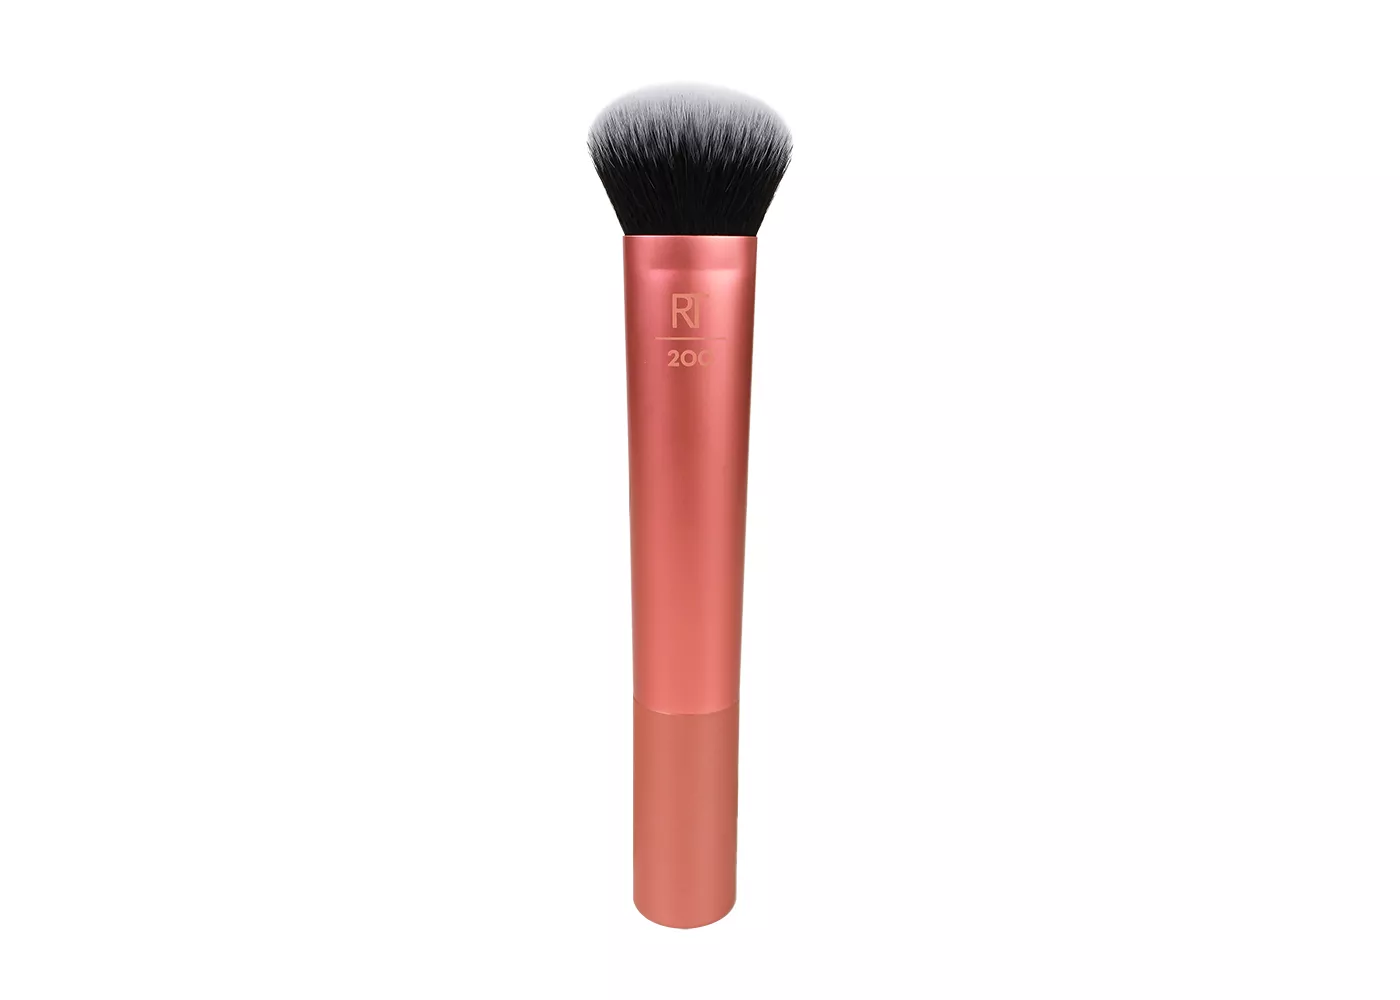 Real Techniques Expert Face Brush - image 1 of 8